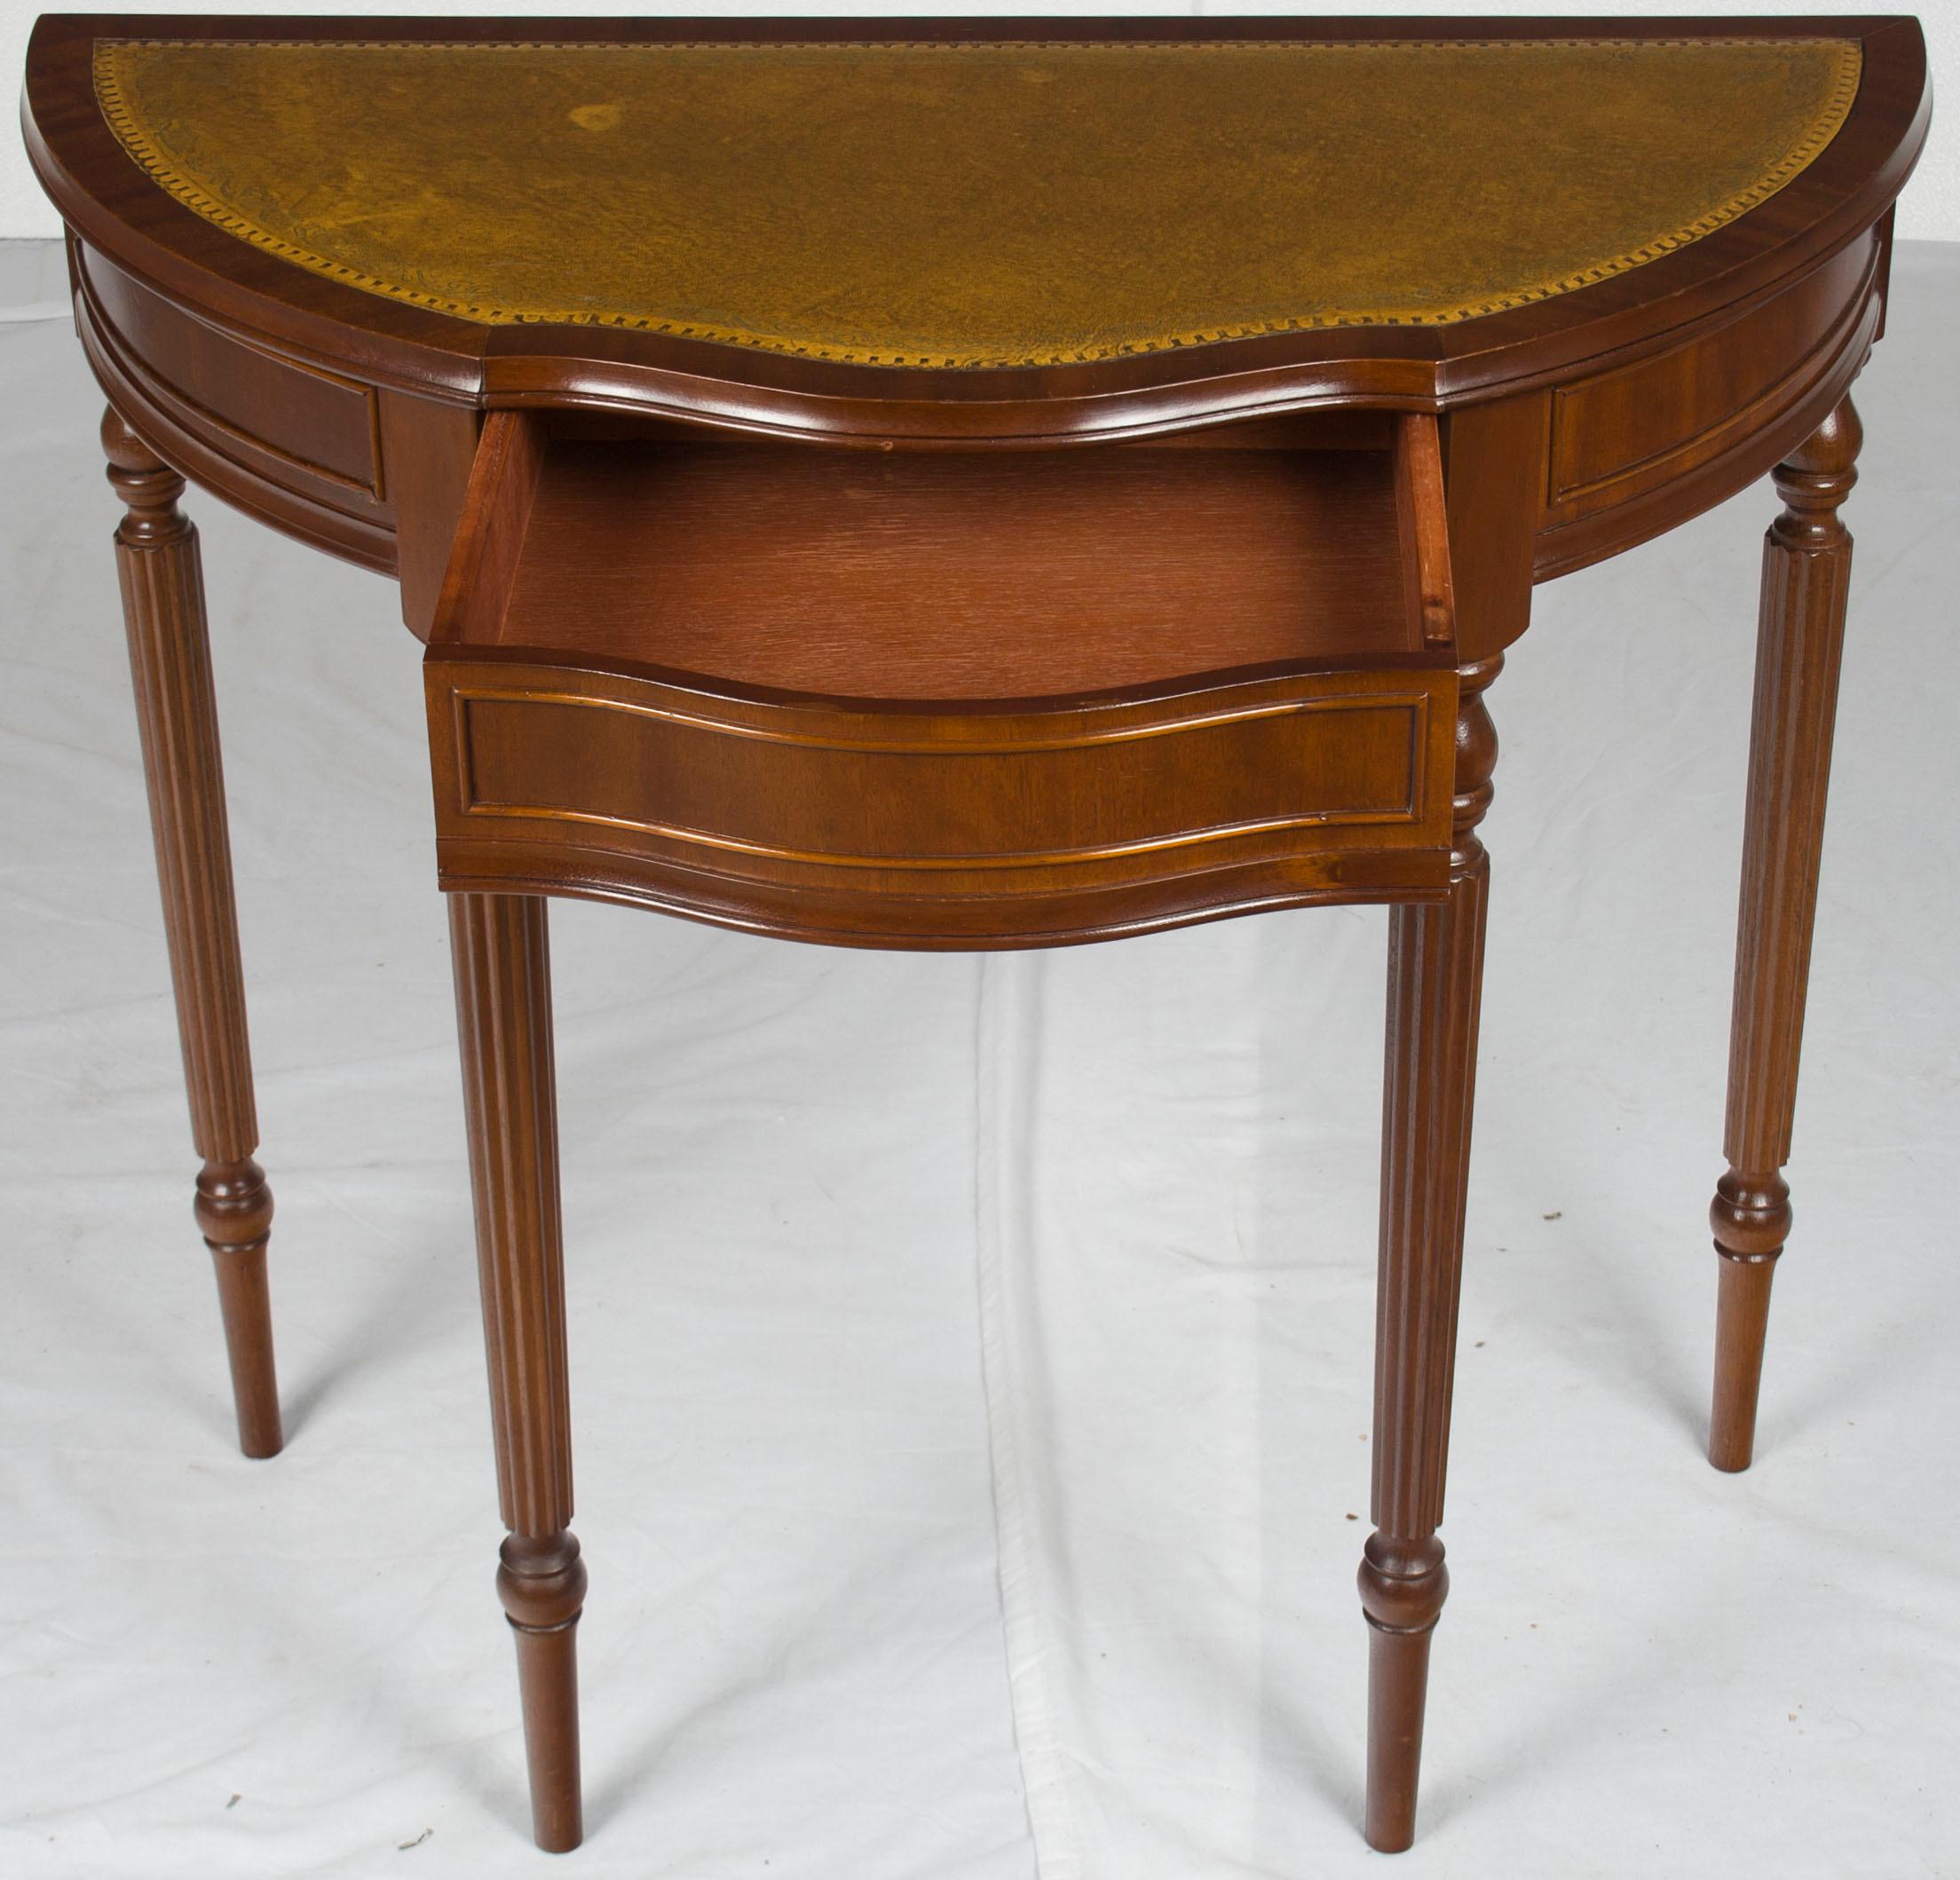 Beautifully done in mahogany with a leather top, this table boasts a classical elegance. This side table is a handy size (only 16.25? deep in the middle!) that will fit just about anywhere! This piece was made sometime around the year 1960.

The